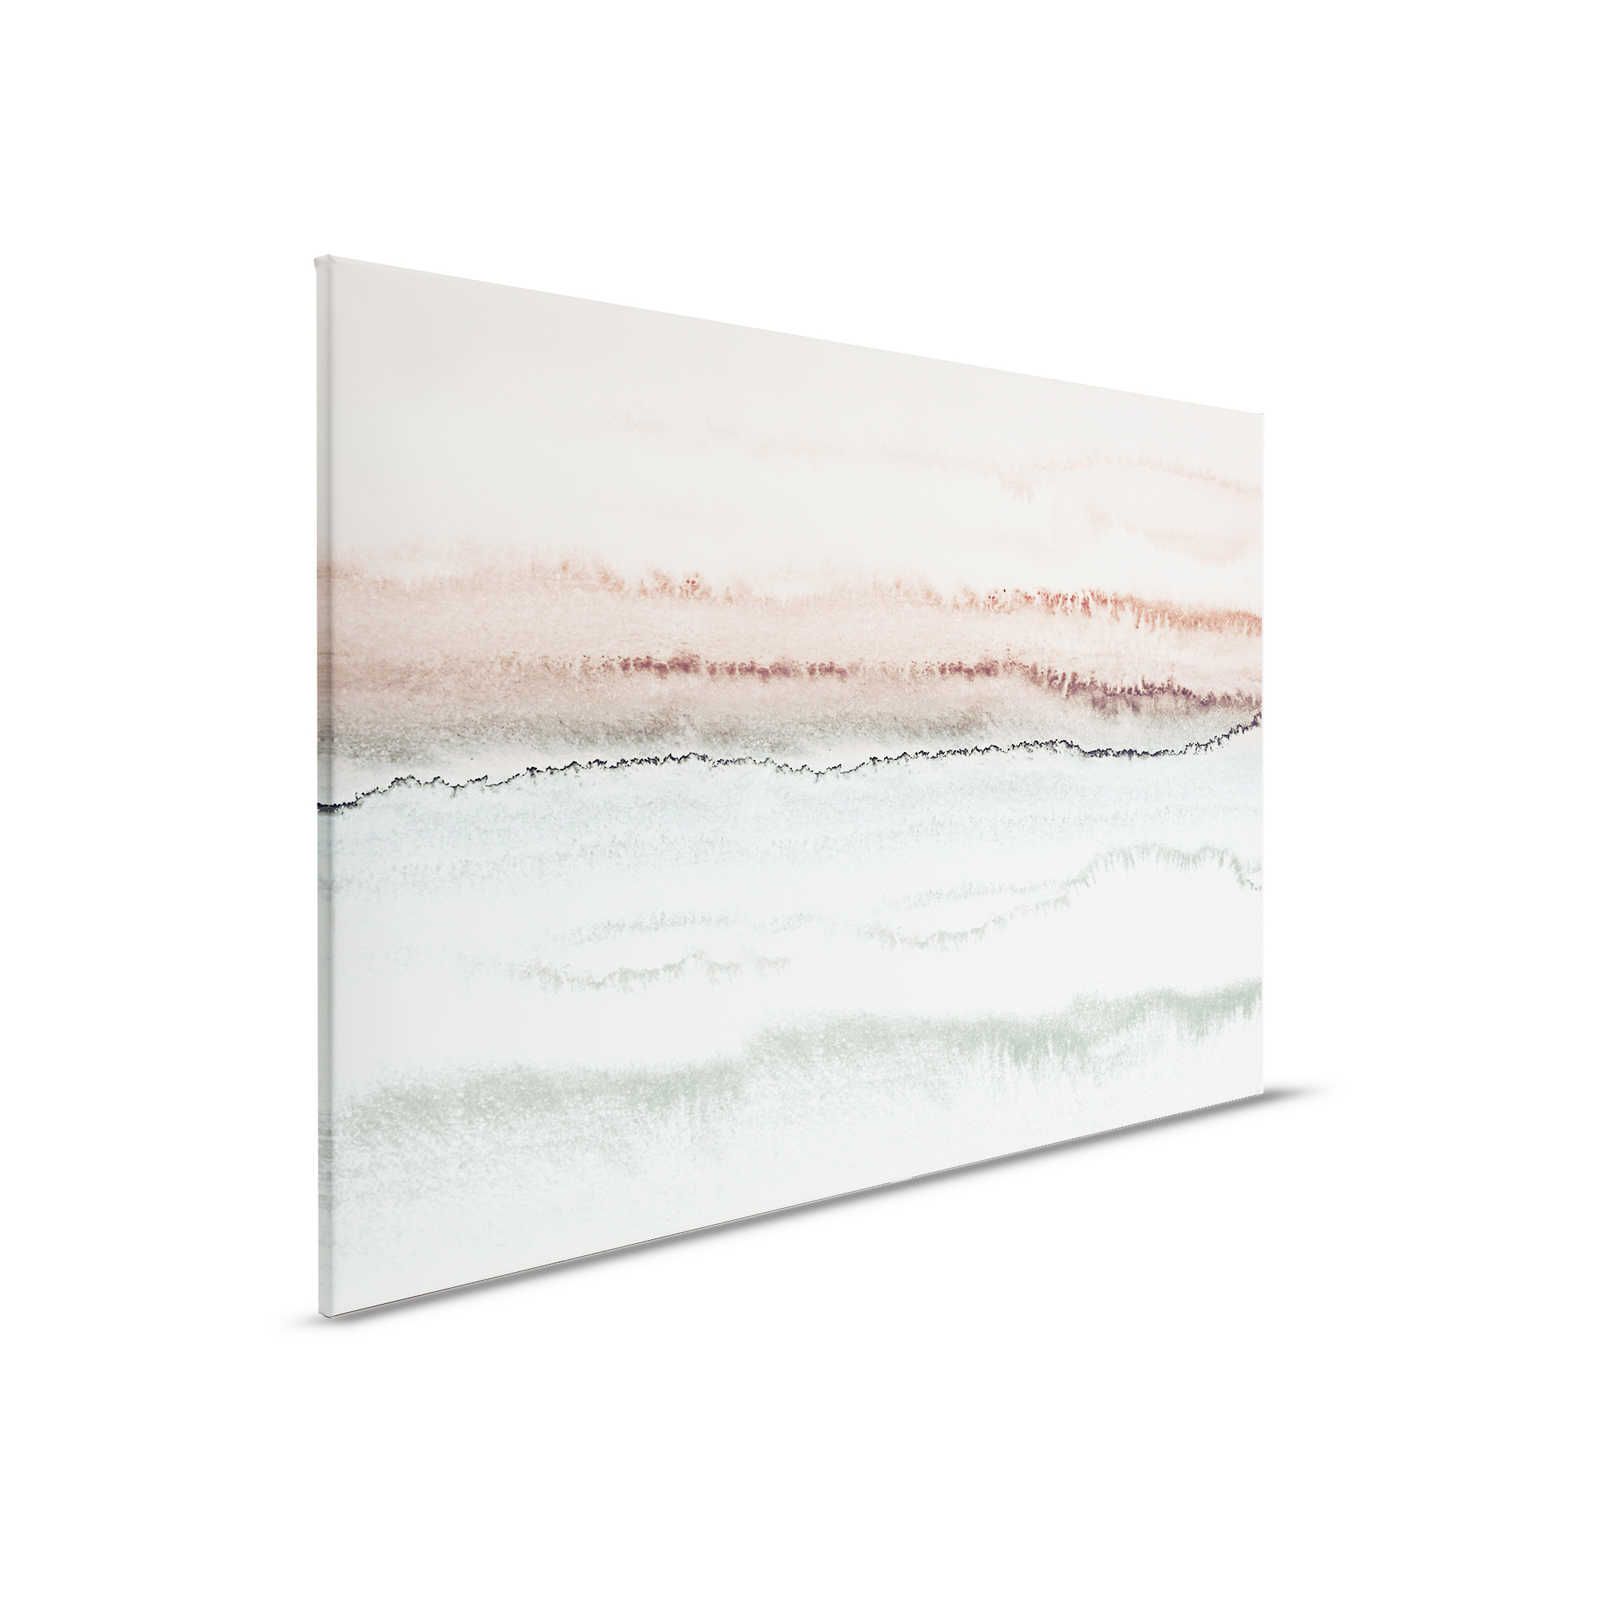         Watercolour Canvas Painting with Abstract Landscape & Gradient - 0.90 m x 0.60 m
    